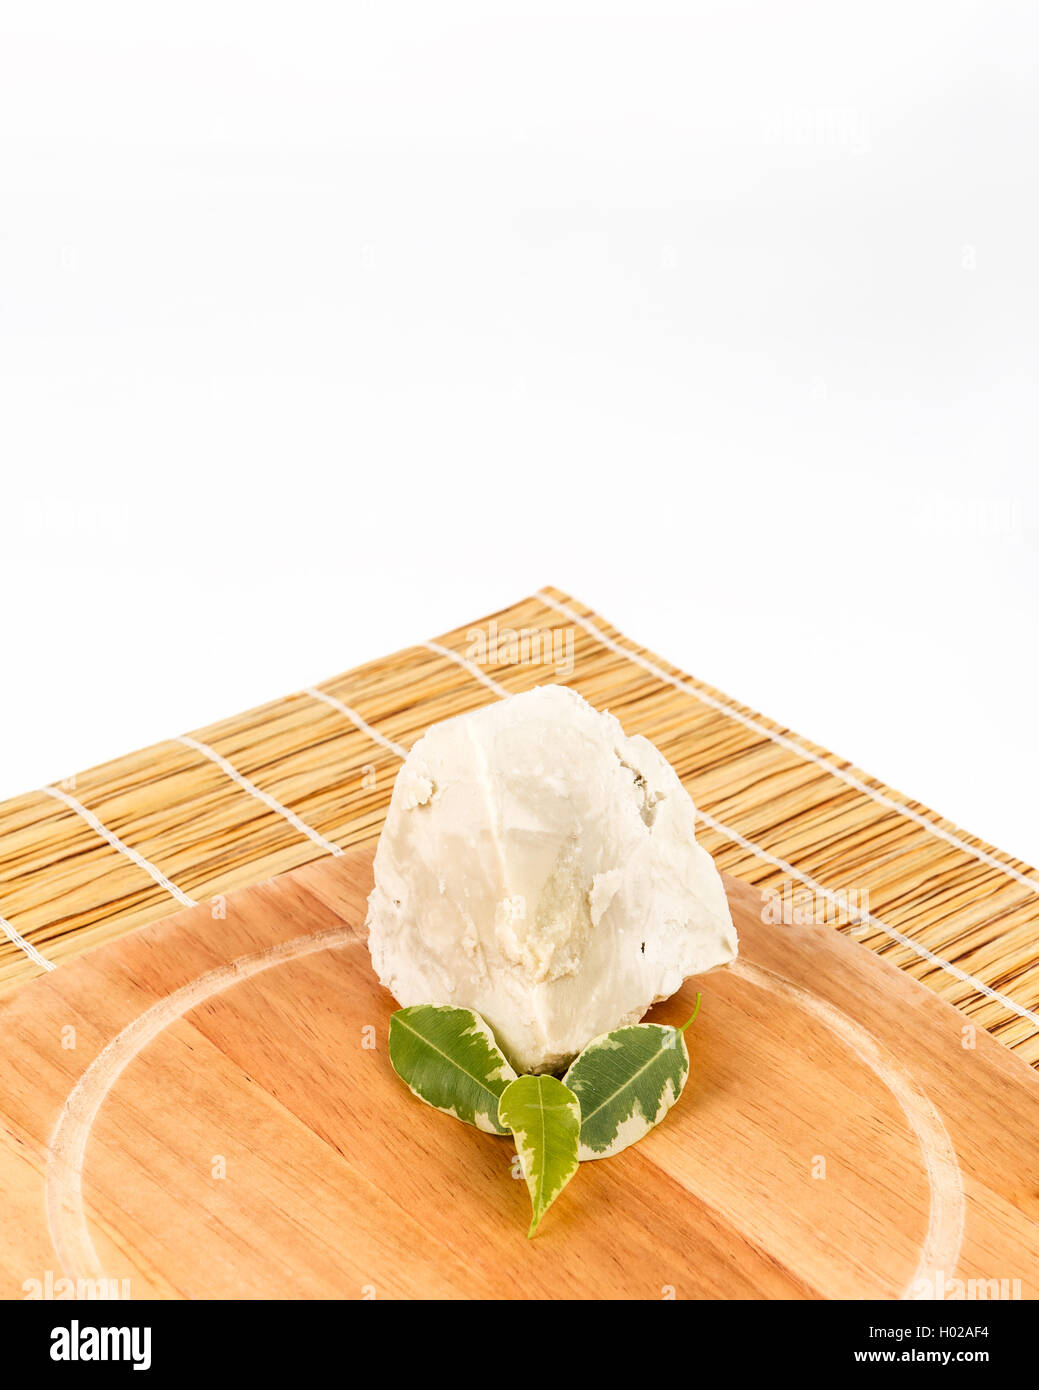 Unrefined, organic Shea butter with green leaves laying on the wooden board which is laying on the straw mat, clean white backgr Stock Photo